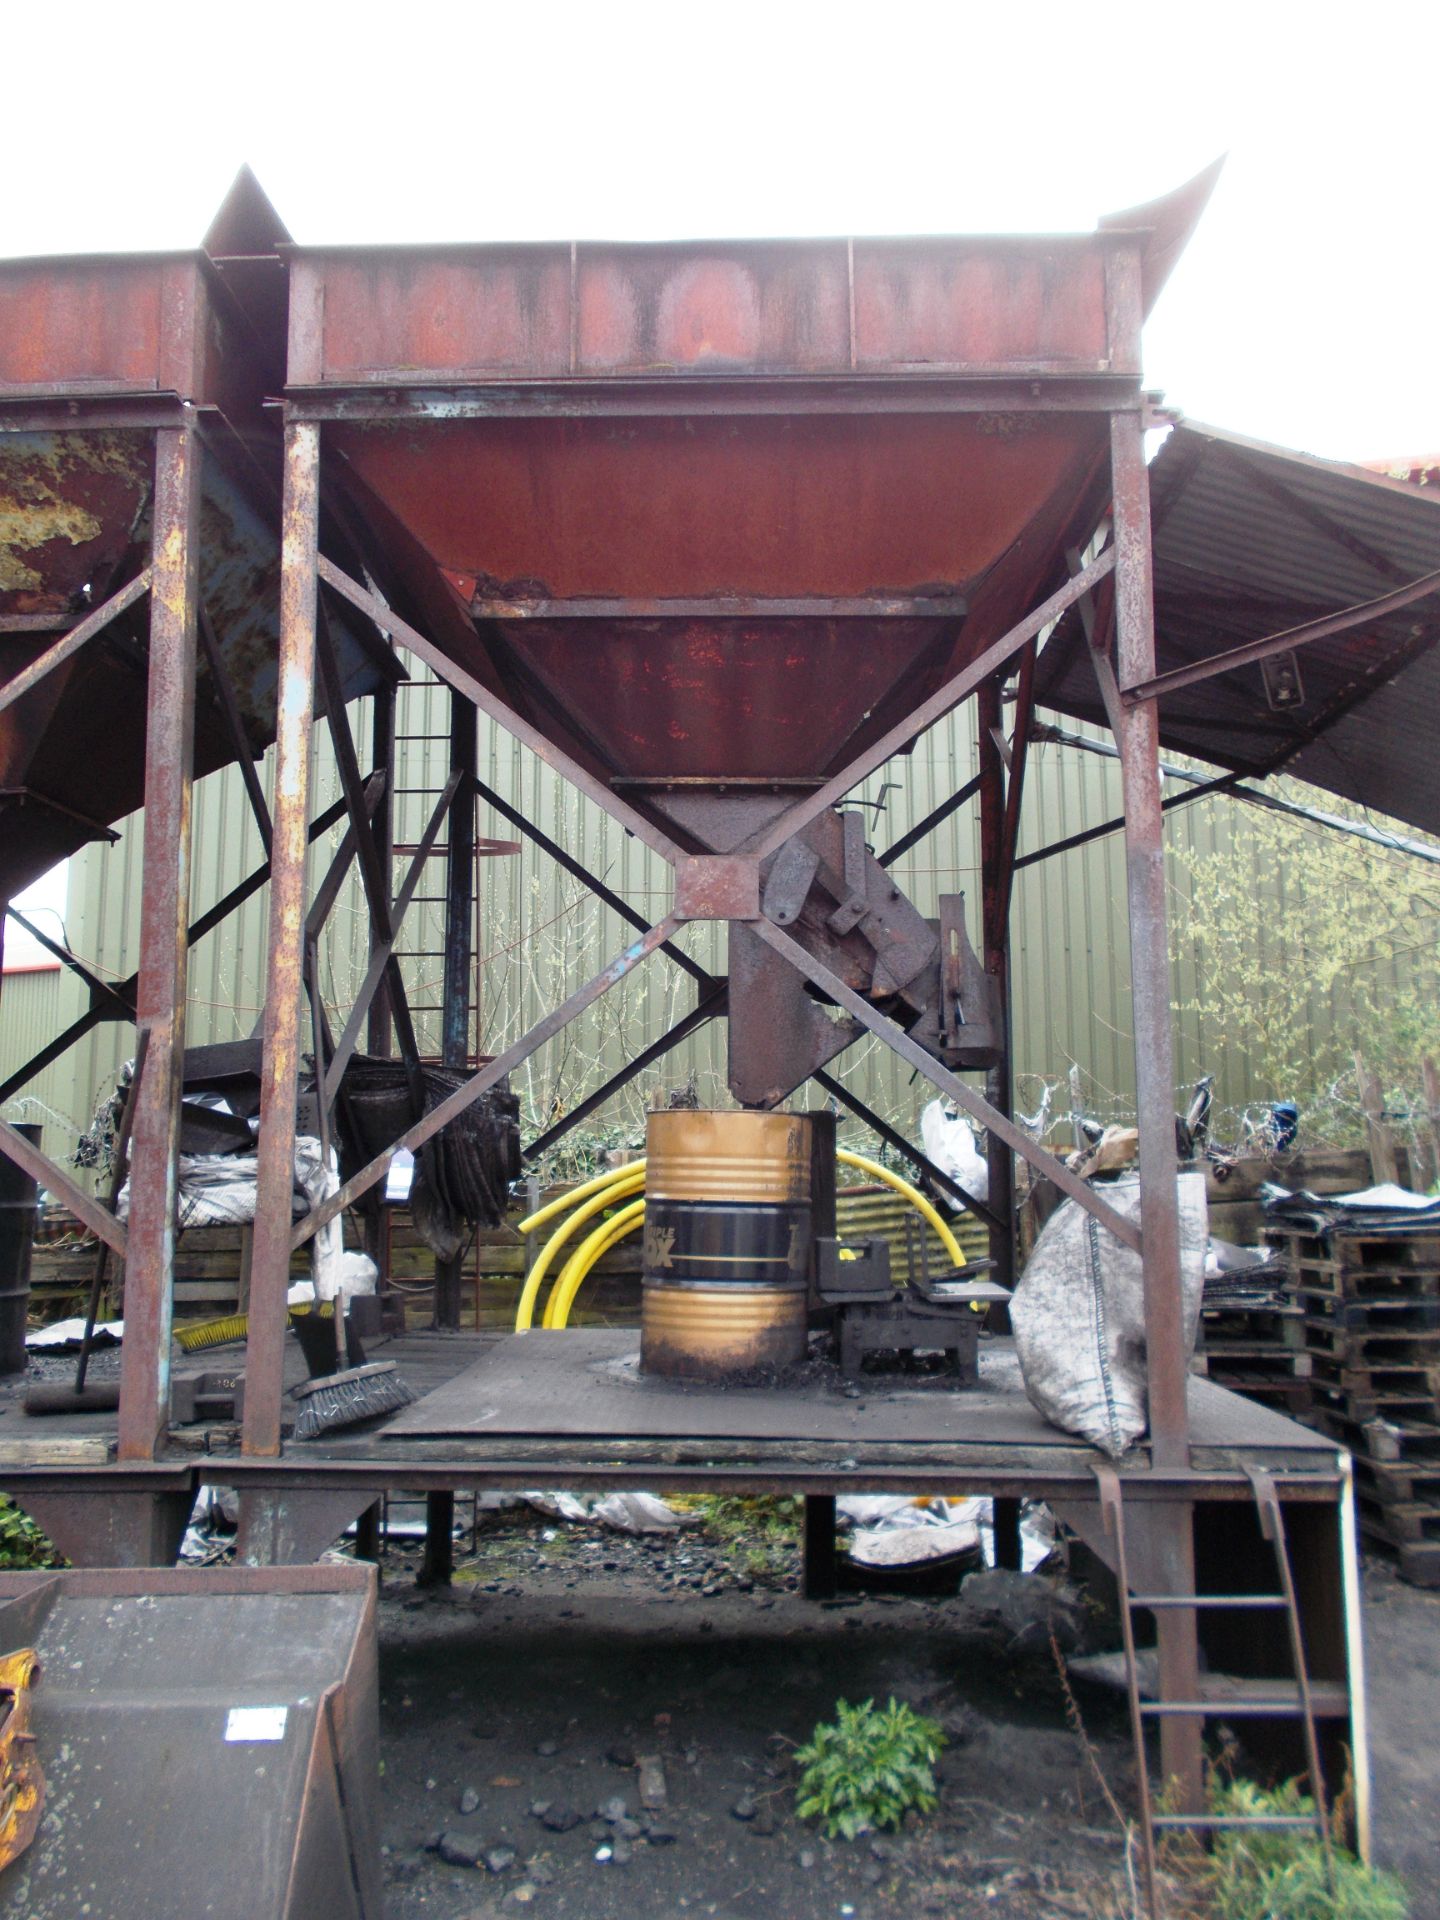 Coal hopper, with an approximate capacity of 1 tonne, equipped with weighing scales (possibly